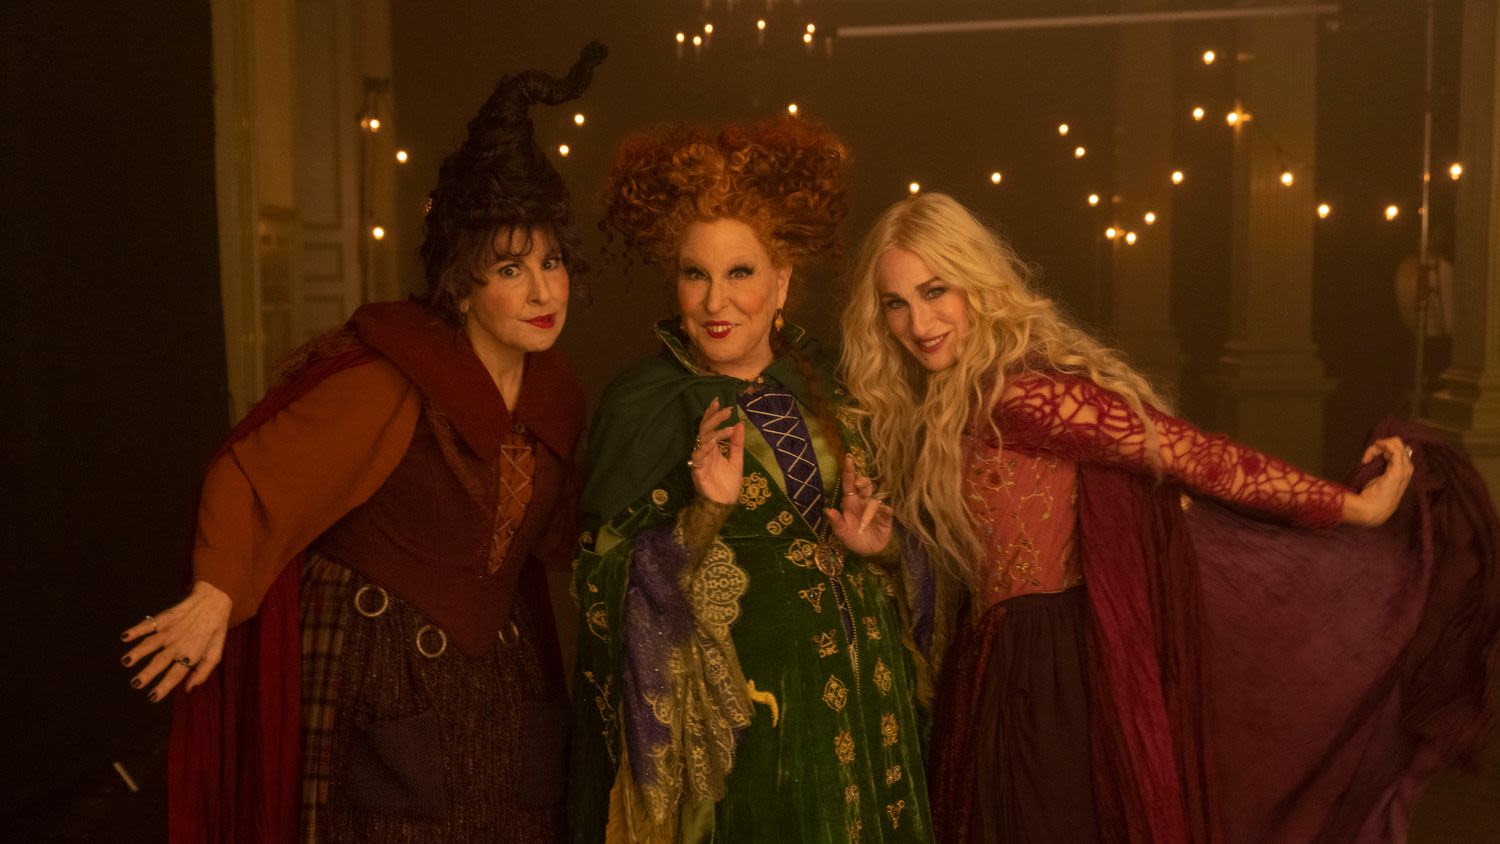 Bette Midler wants 'Hocus Pocus 3' to happen while cast is 'still breathing'